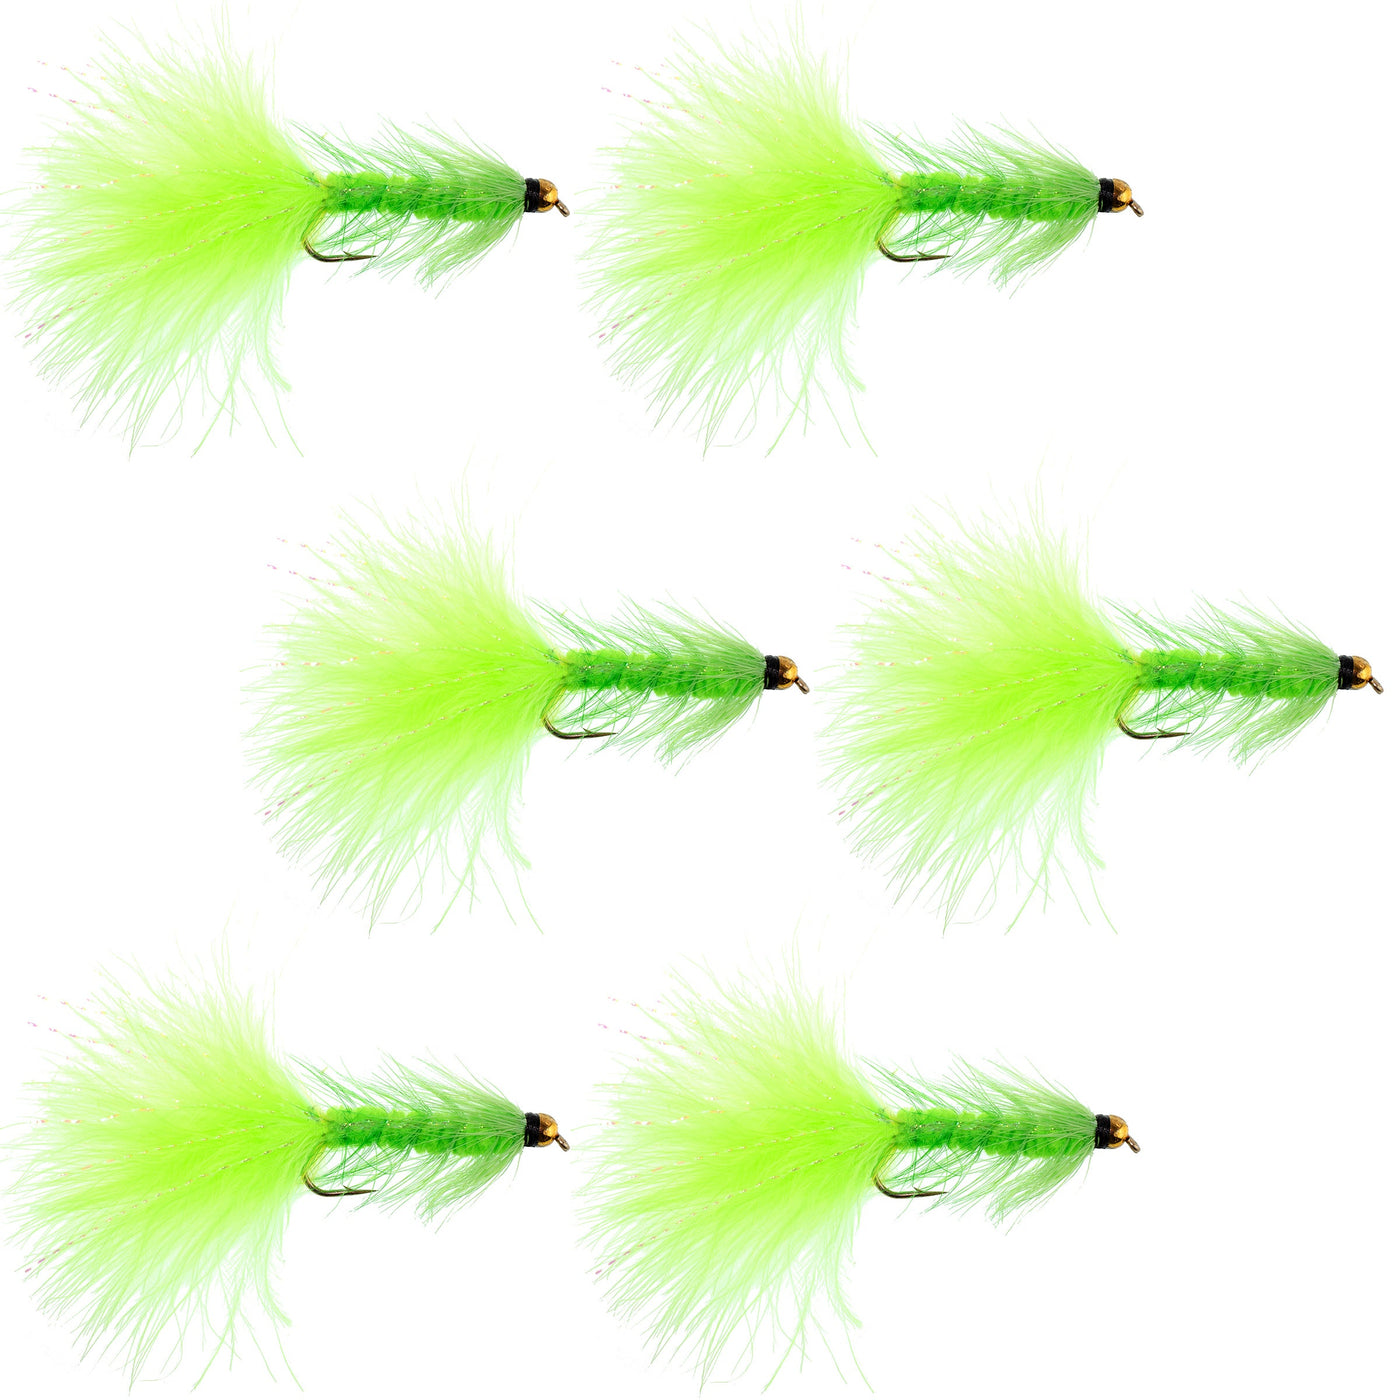 Chartreuse Bead Head Crystal Woolly Bugger Classic Streamer Flies - Set of 6 Trout Fly Fishing Flies - Hook Size 8